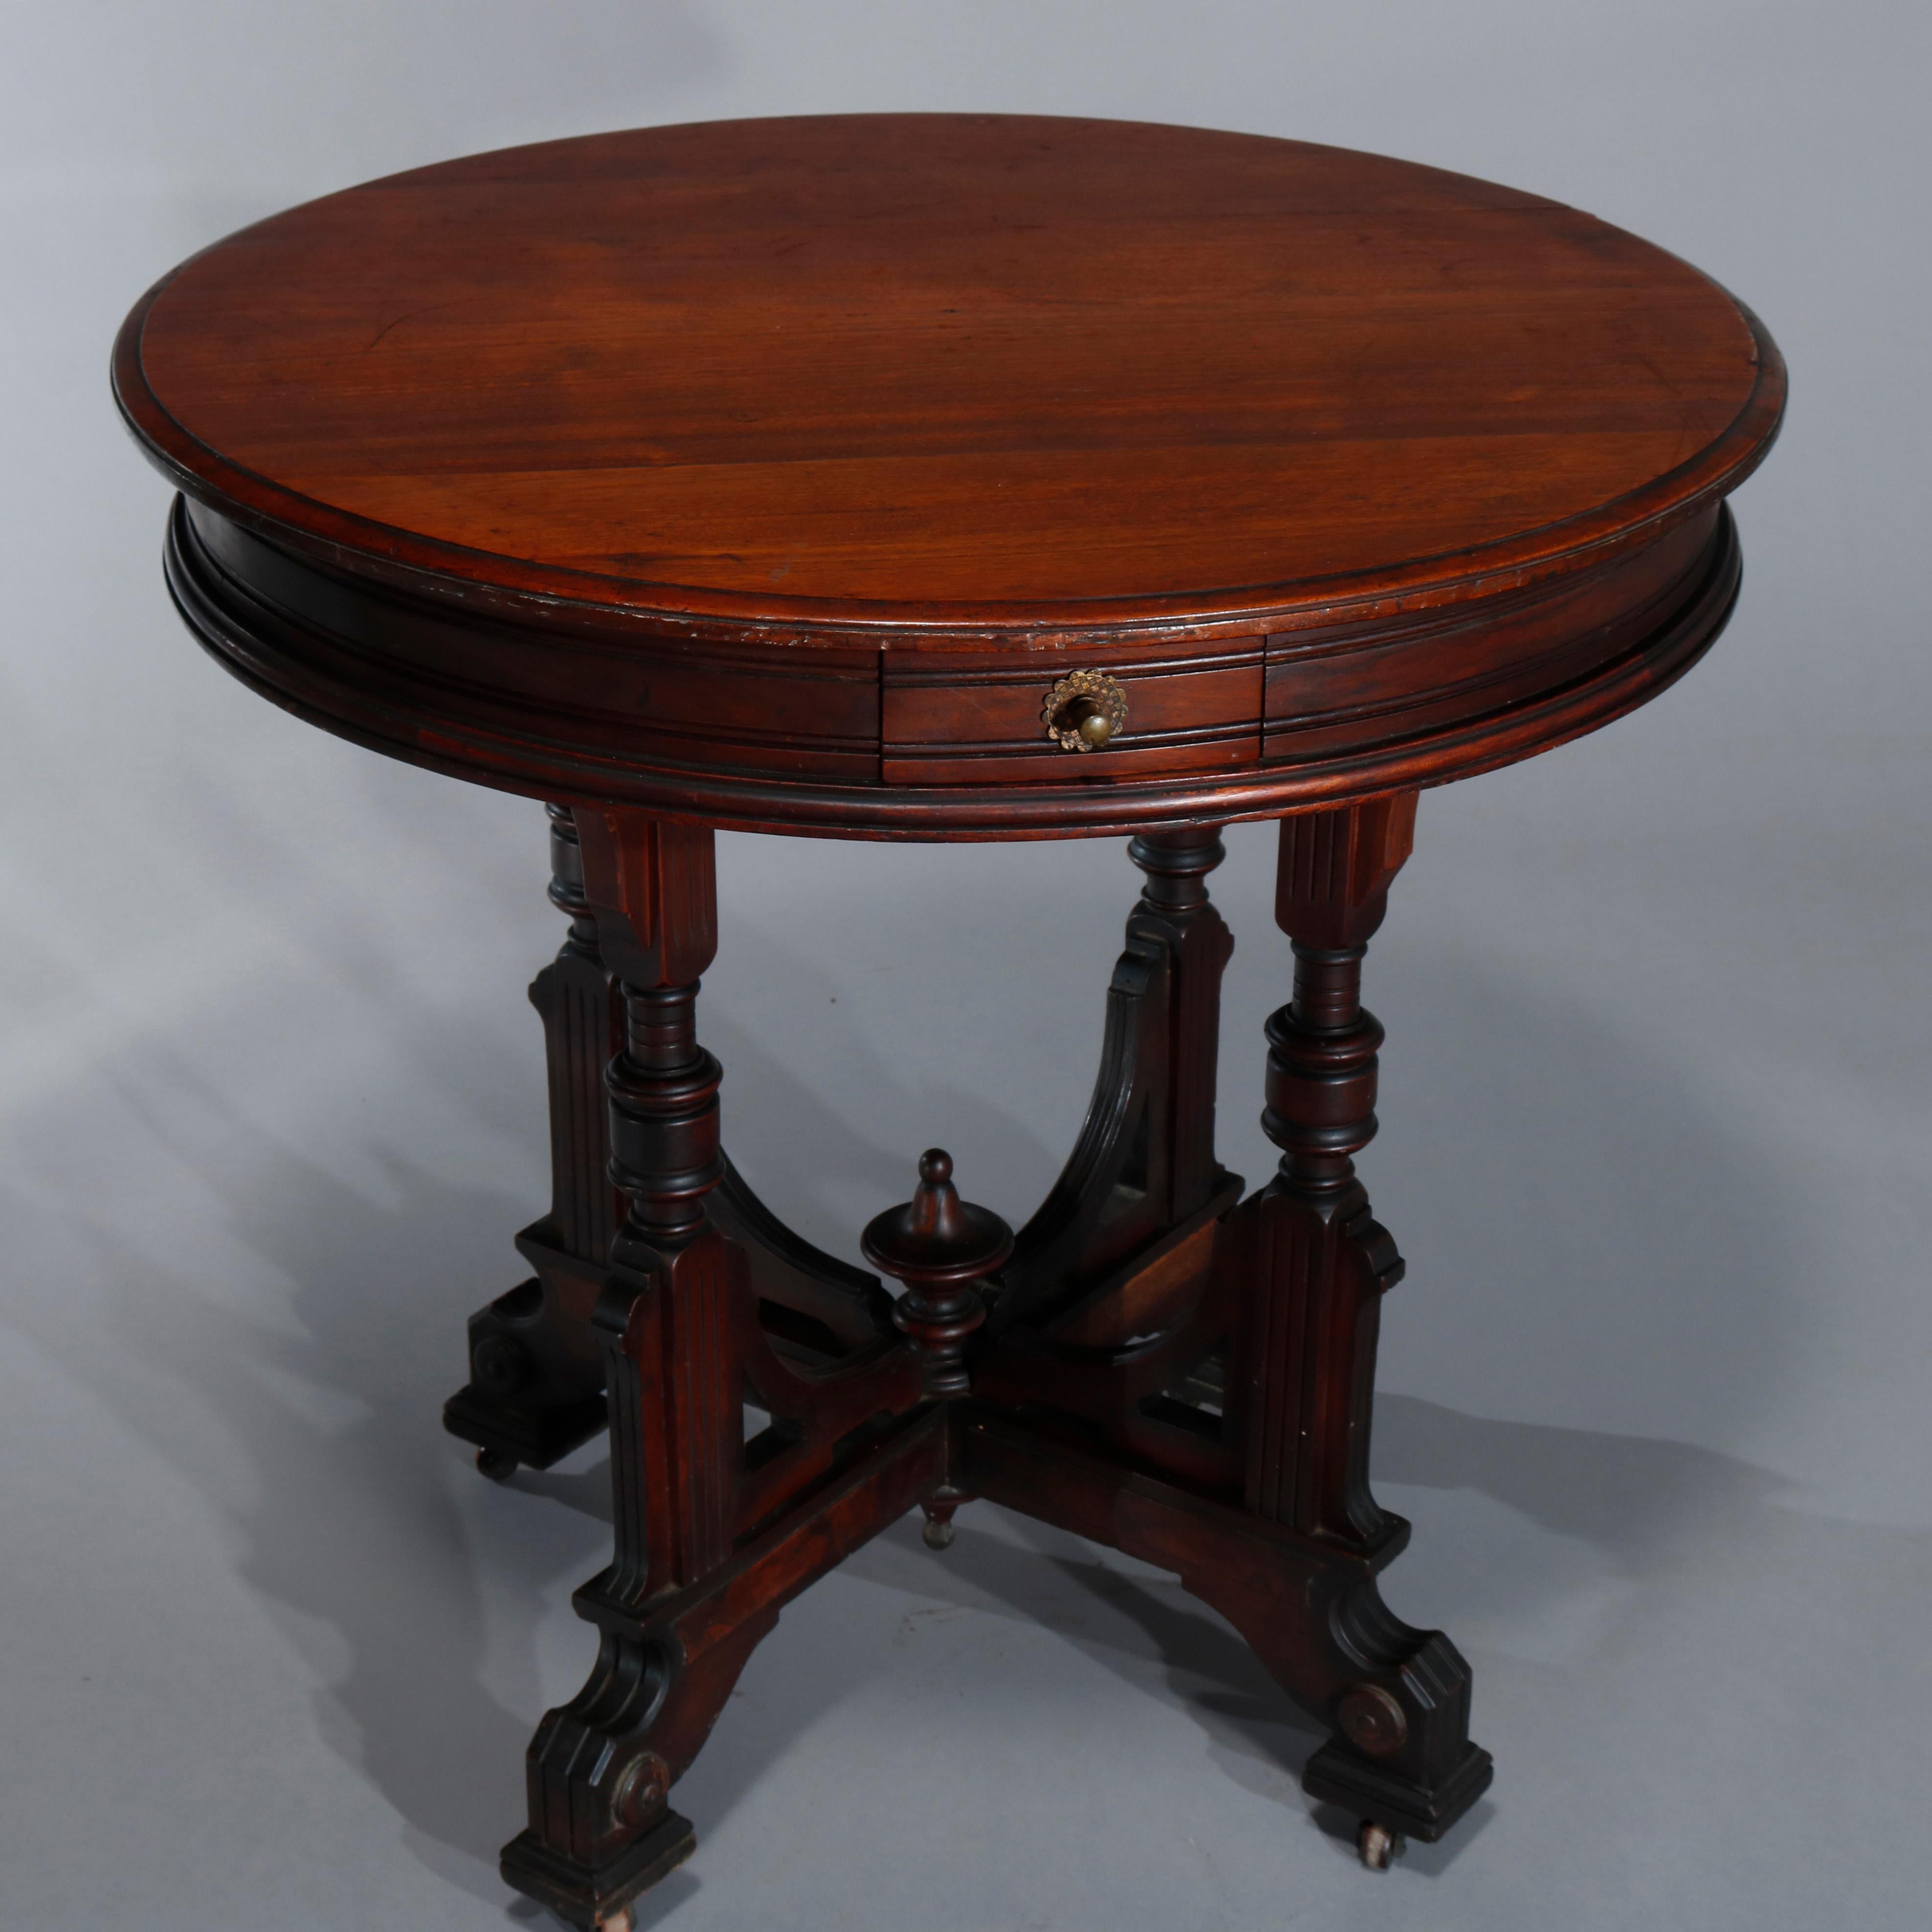 An antique Eastlake parlor lamp table offers walnut construction with beveled top having deep skirt with single drawer raised on four carved legs having stretcher with corbels, central finials and terminating in stylized paw feet with casters, circa